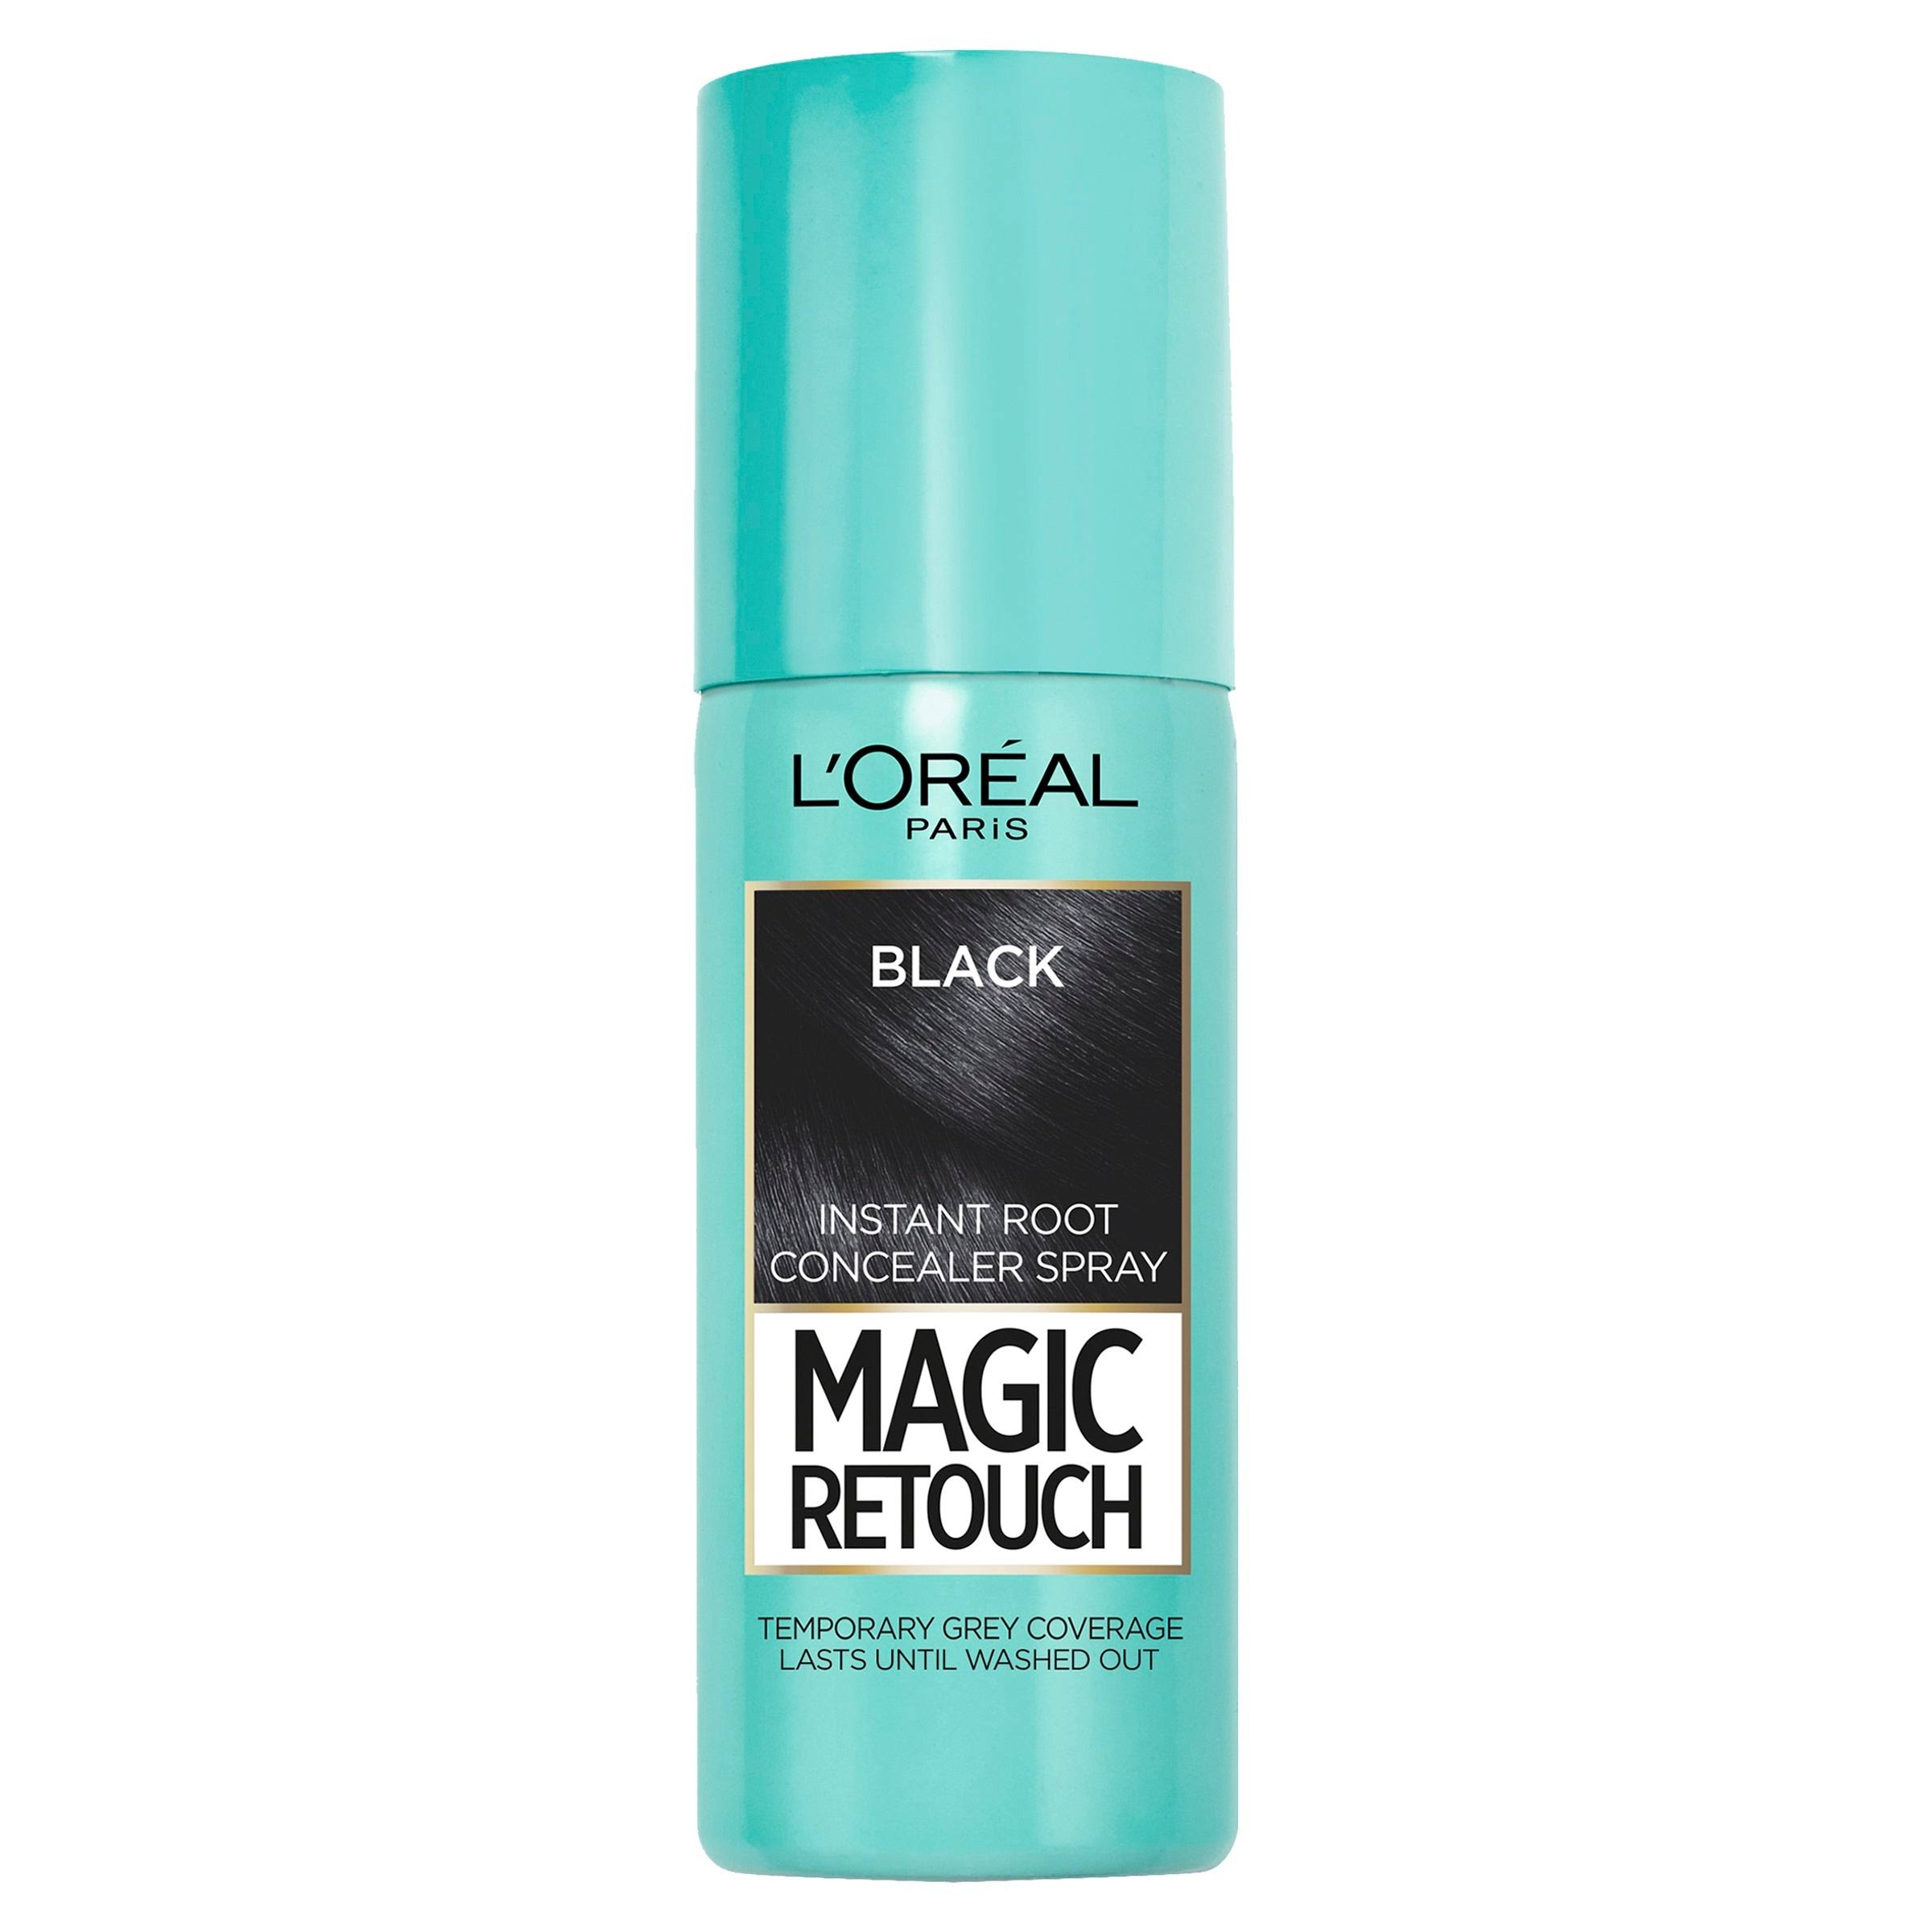 L'Oreal Magic Retouch Temporary Instant Grey Root Concealer Spray - Black, 75ml